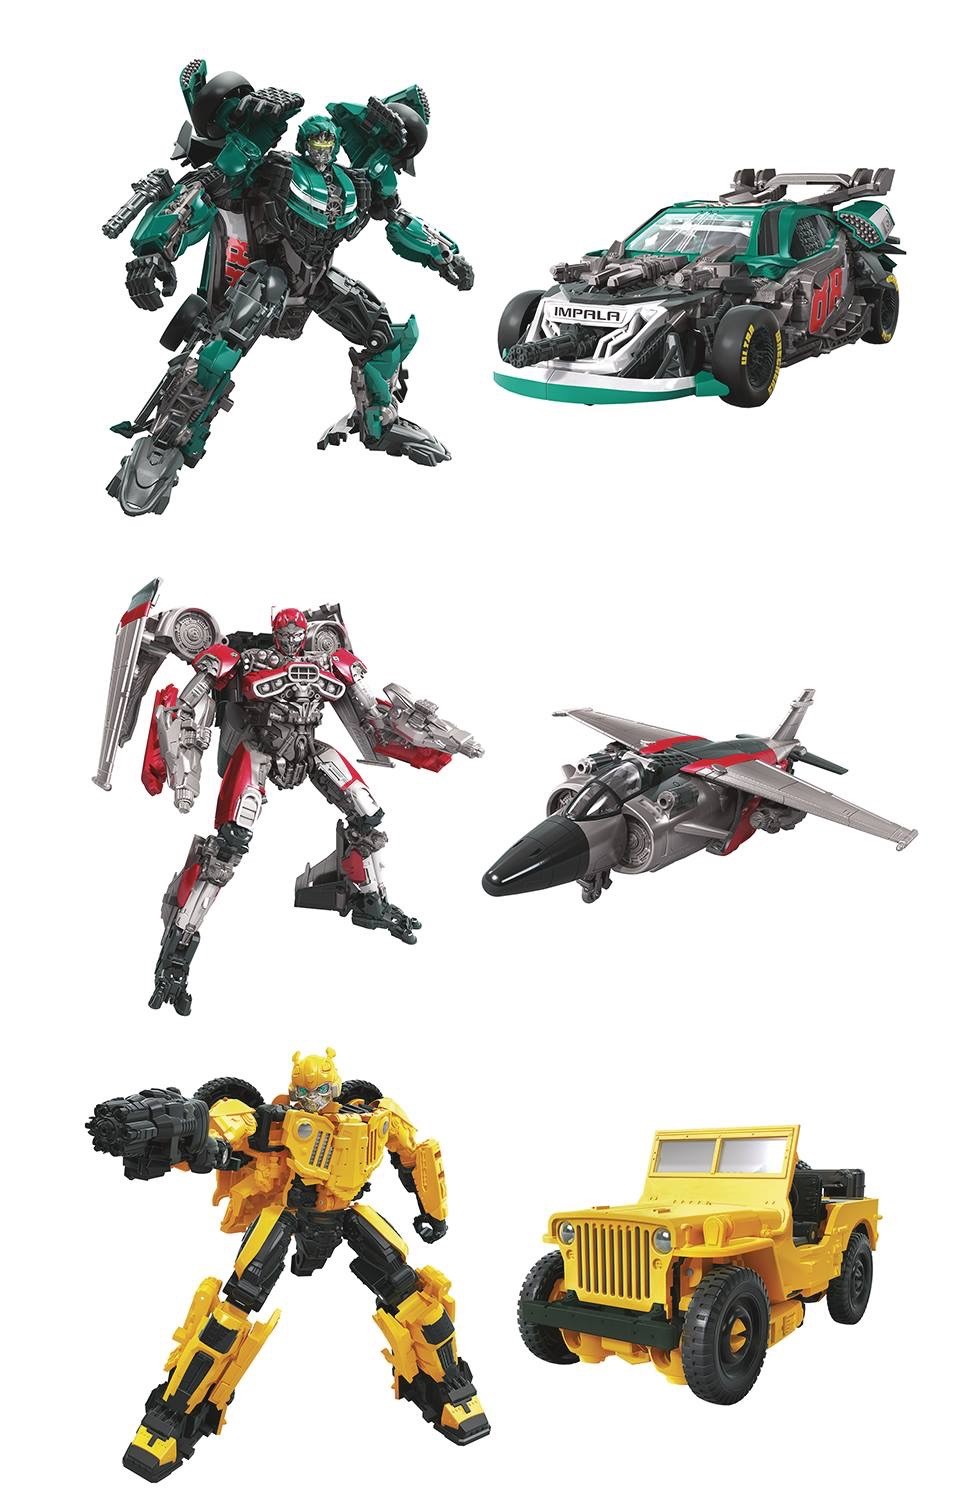 Transformers News: Studio Series Roadbuster, Jet-Mode Shatter, and Jeep Bumblebee Figures Revealed